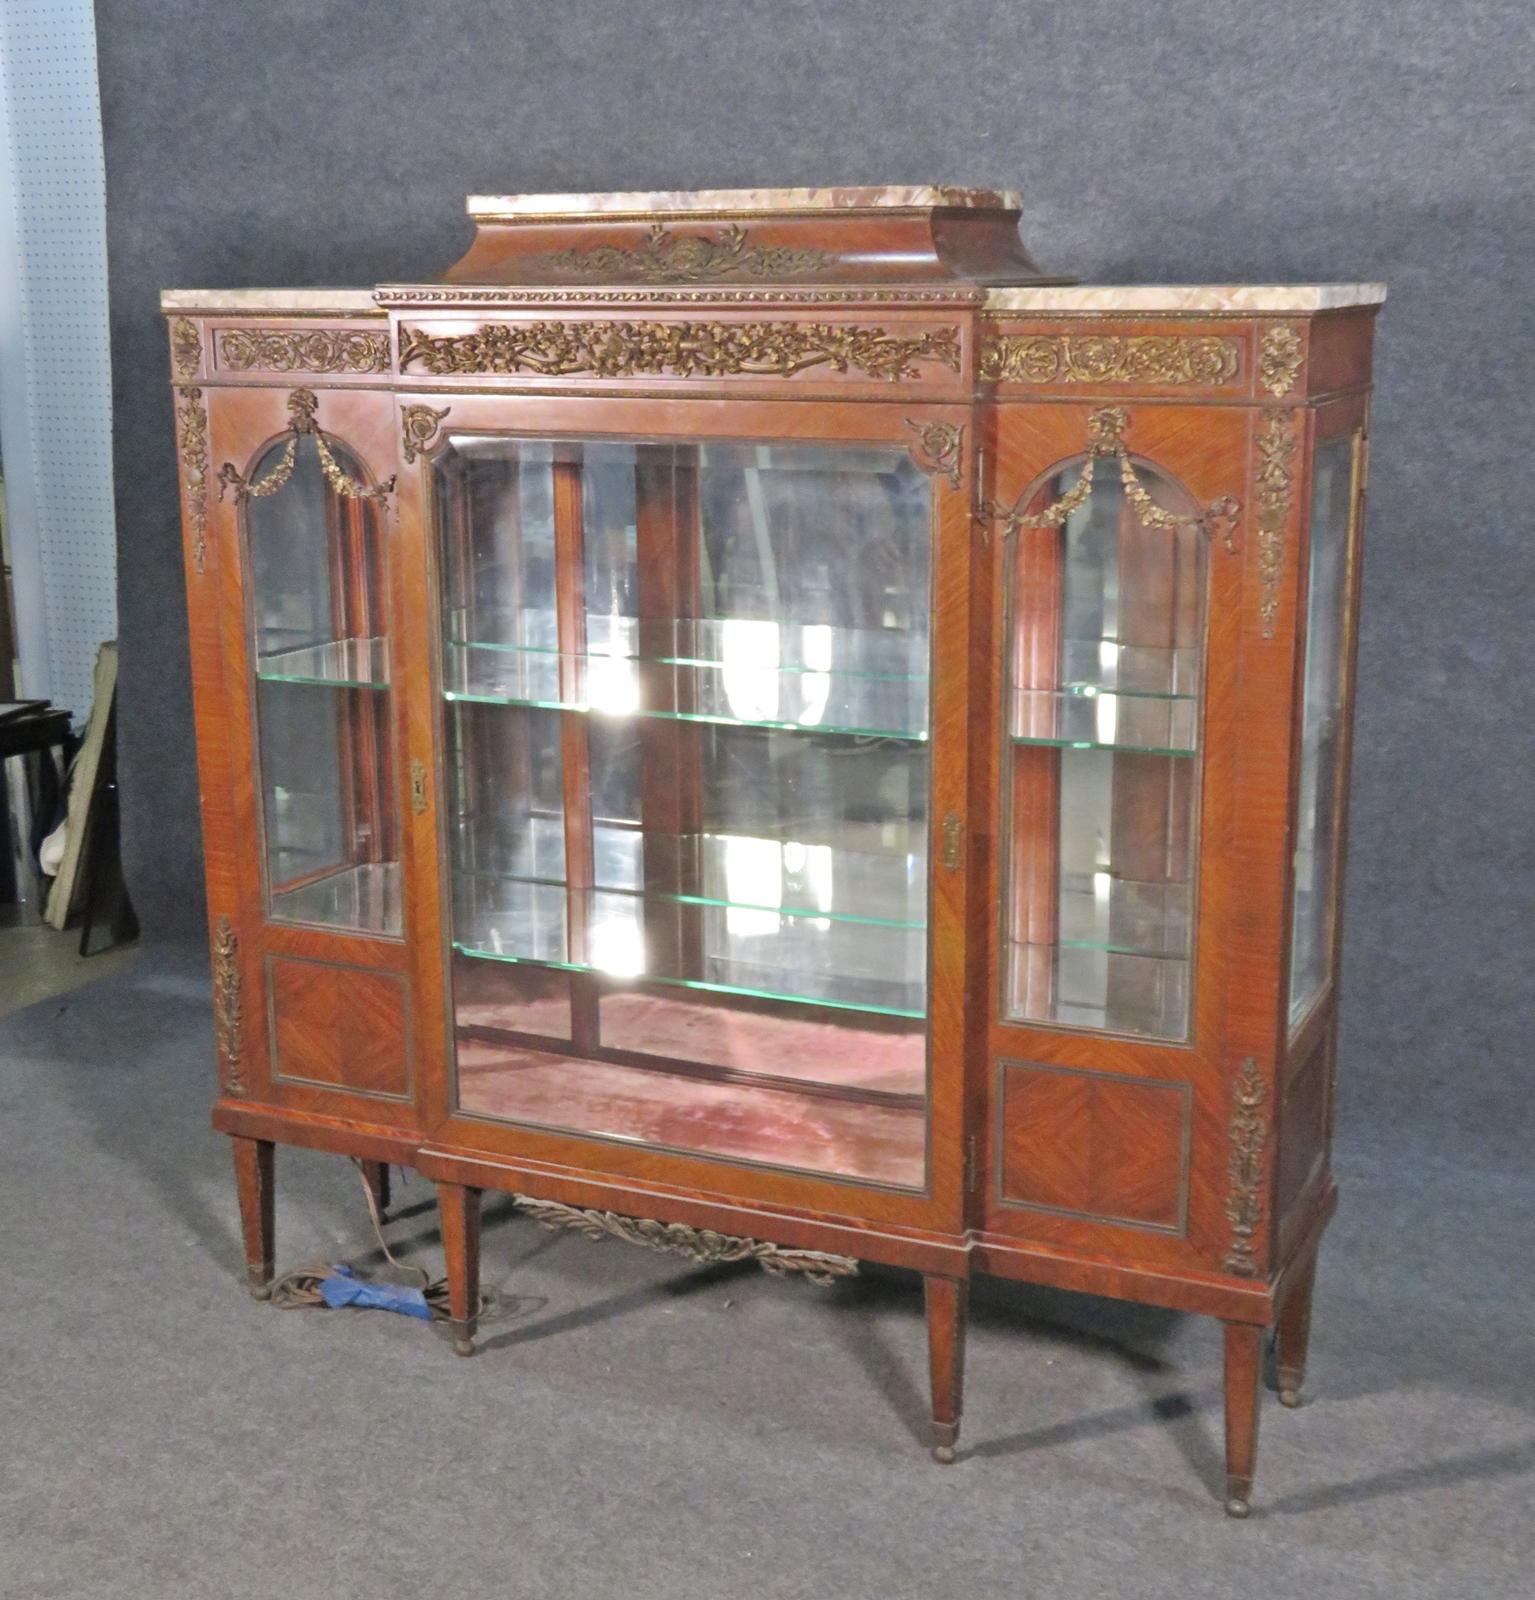 Signed. Brass ormolu. Marble top. One glass door containing 2 glass shelves. Measures: Lighted. 54 3/8